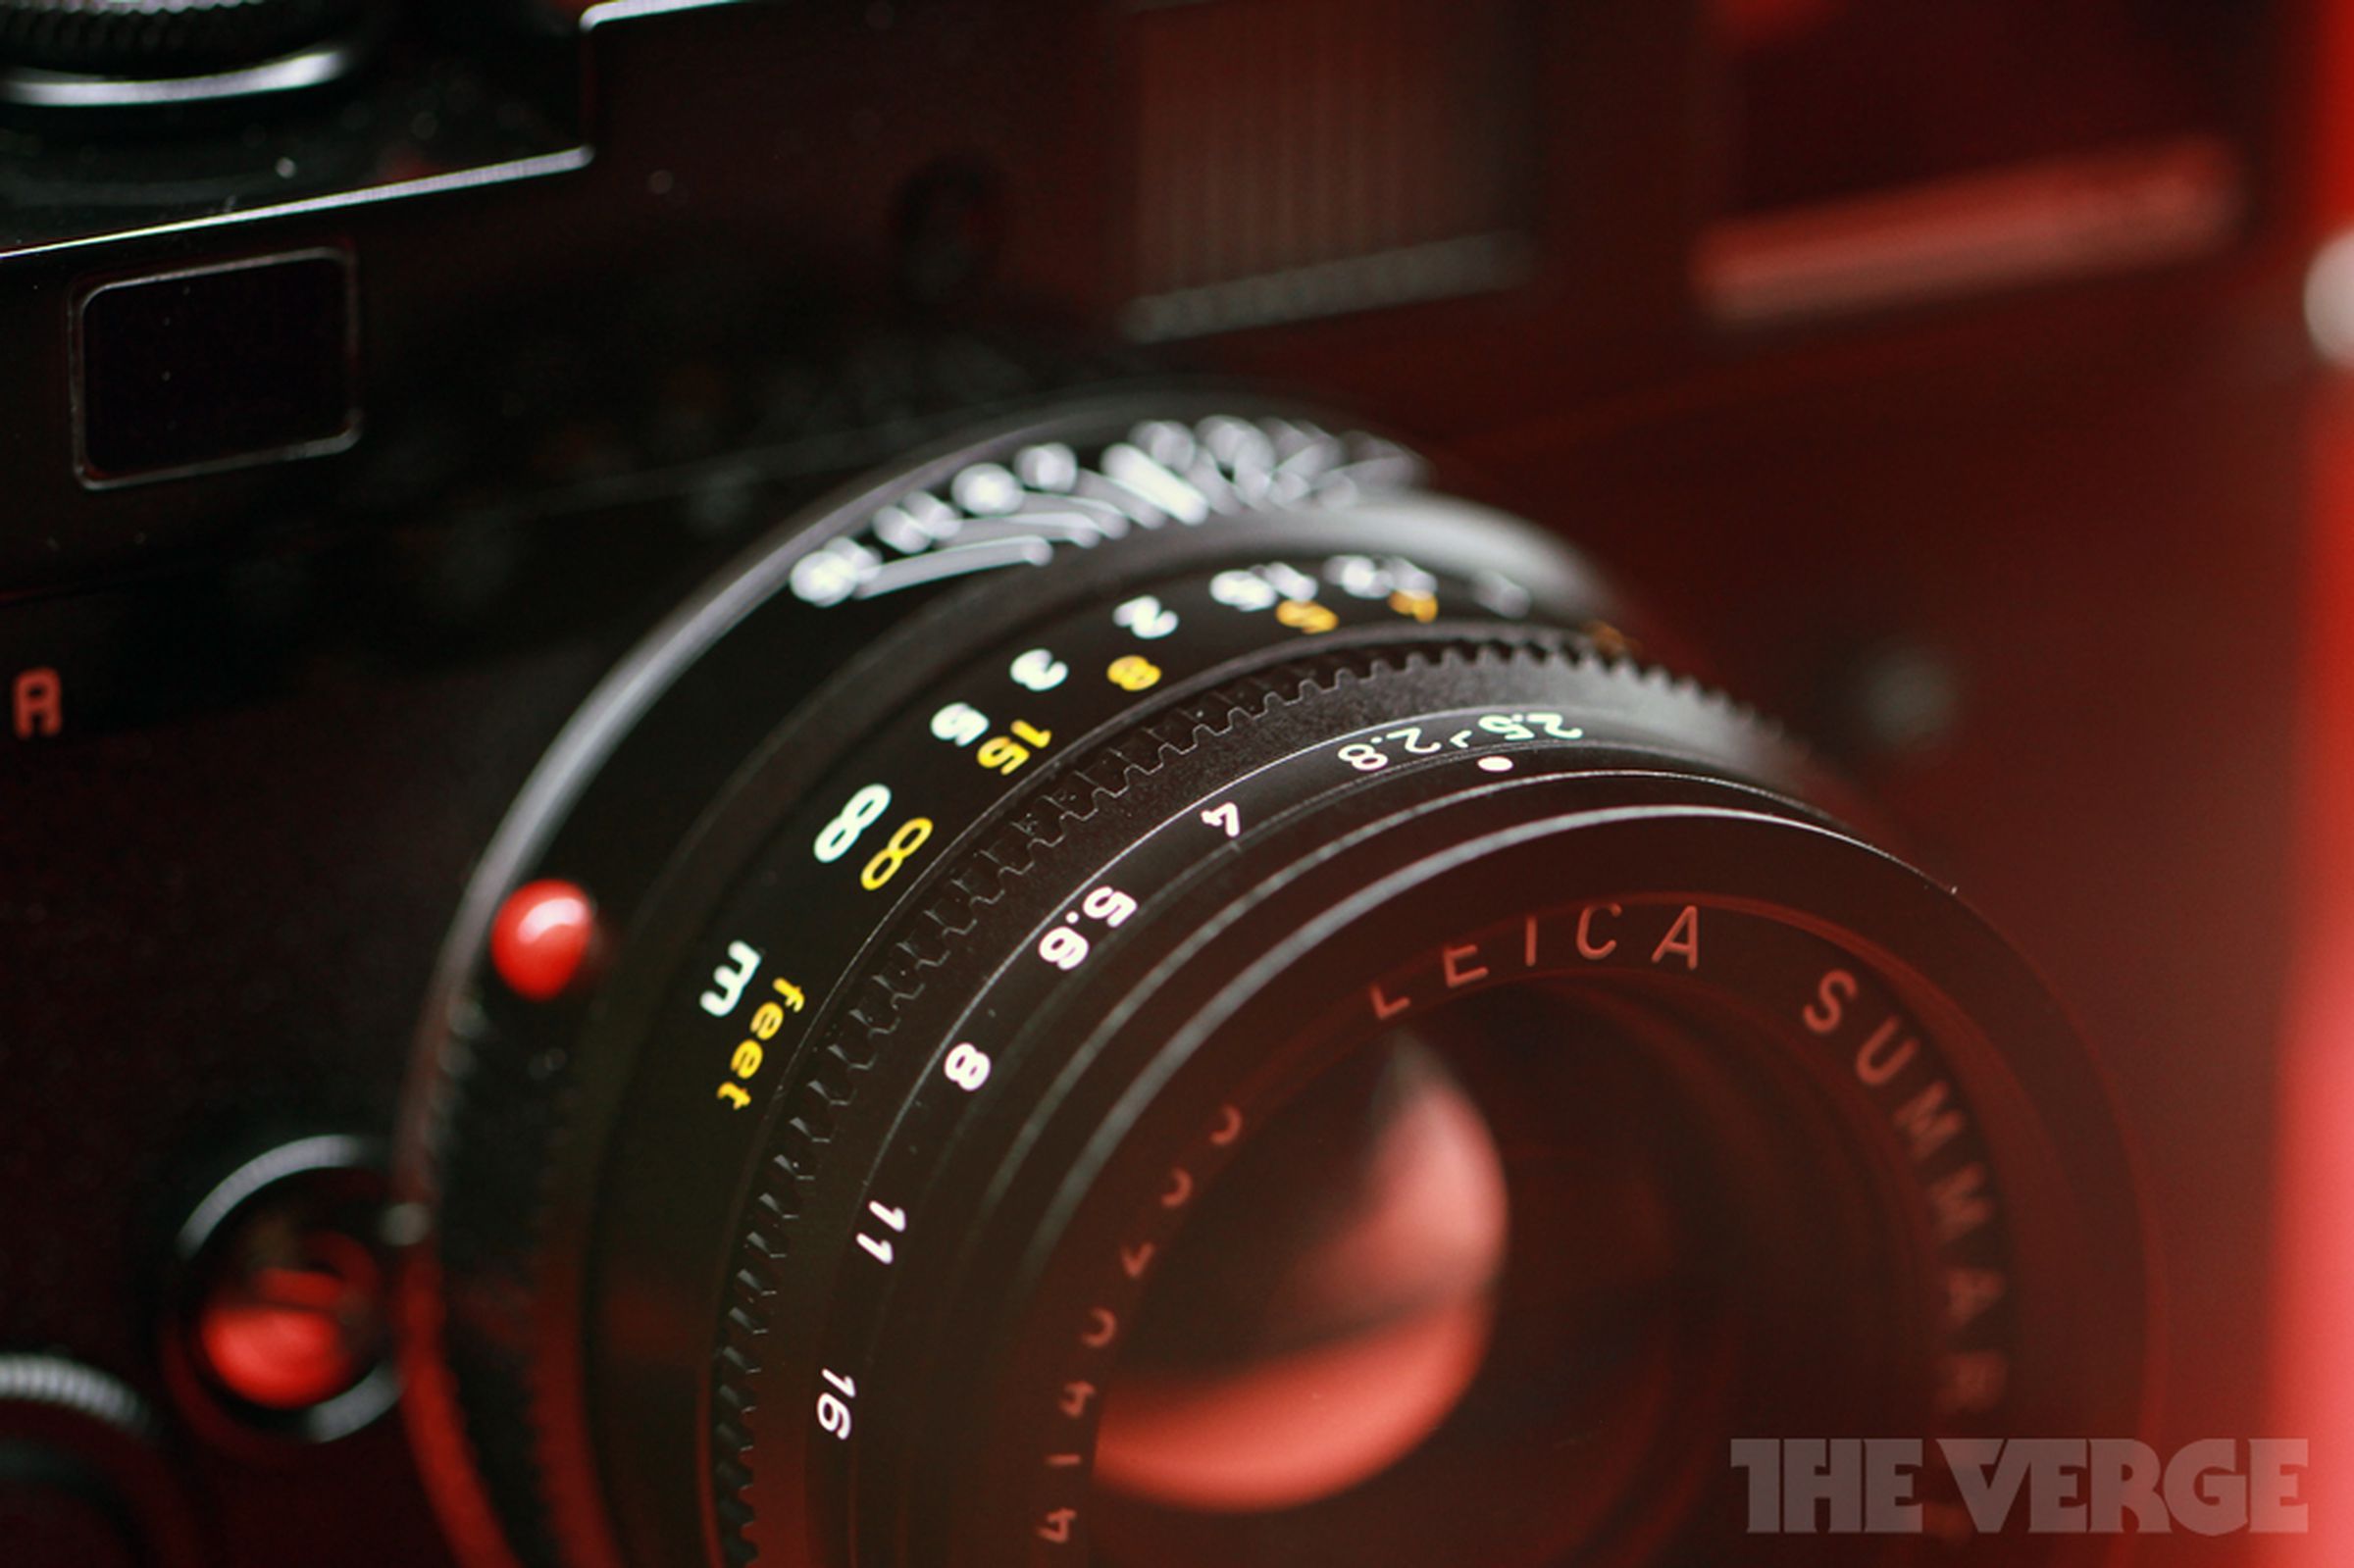 Leica store grand opening in Washington, DC